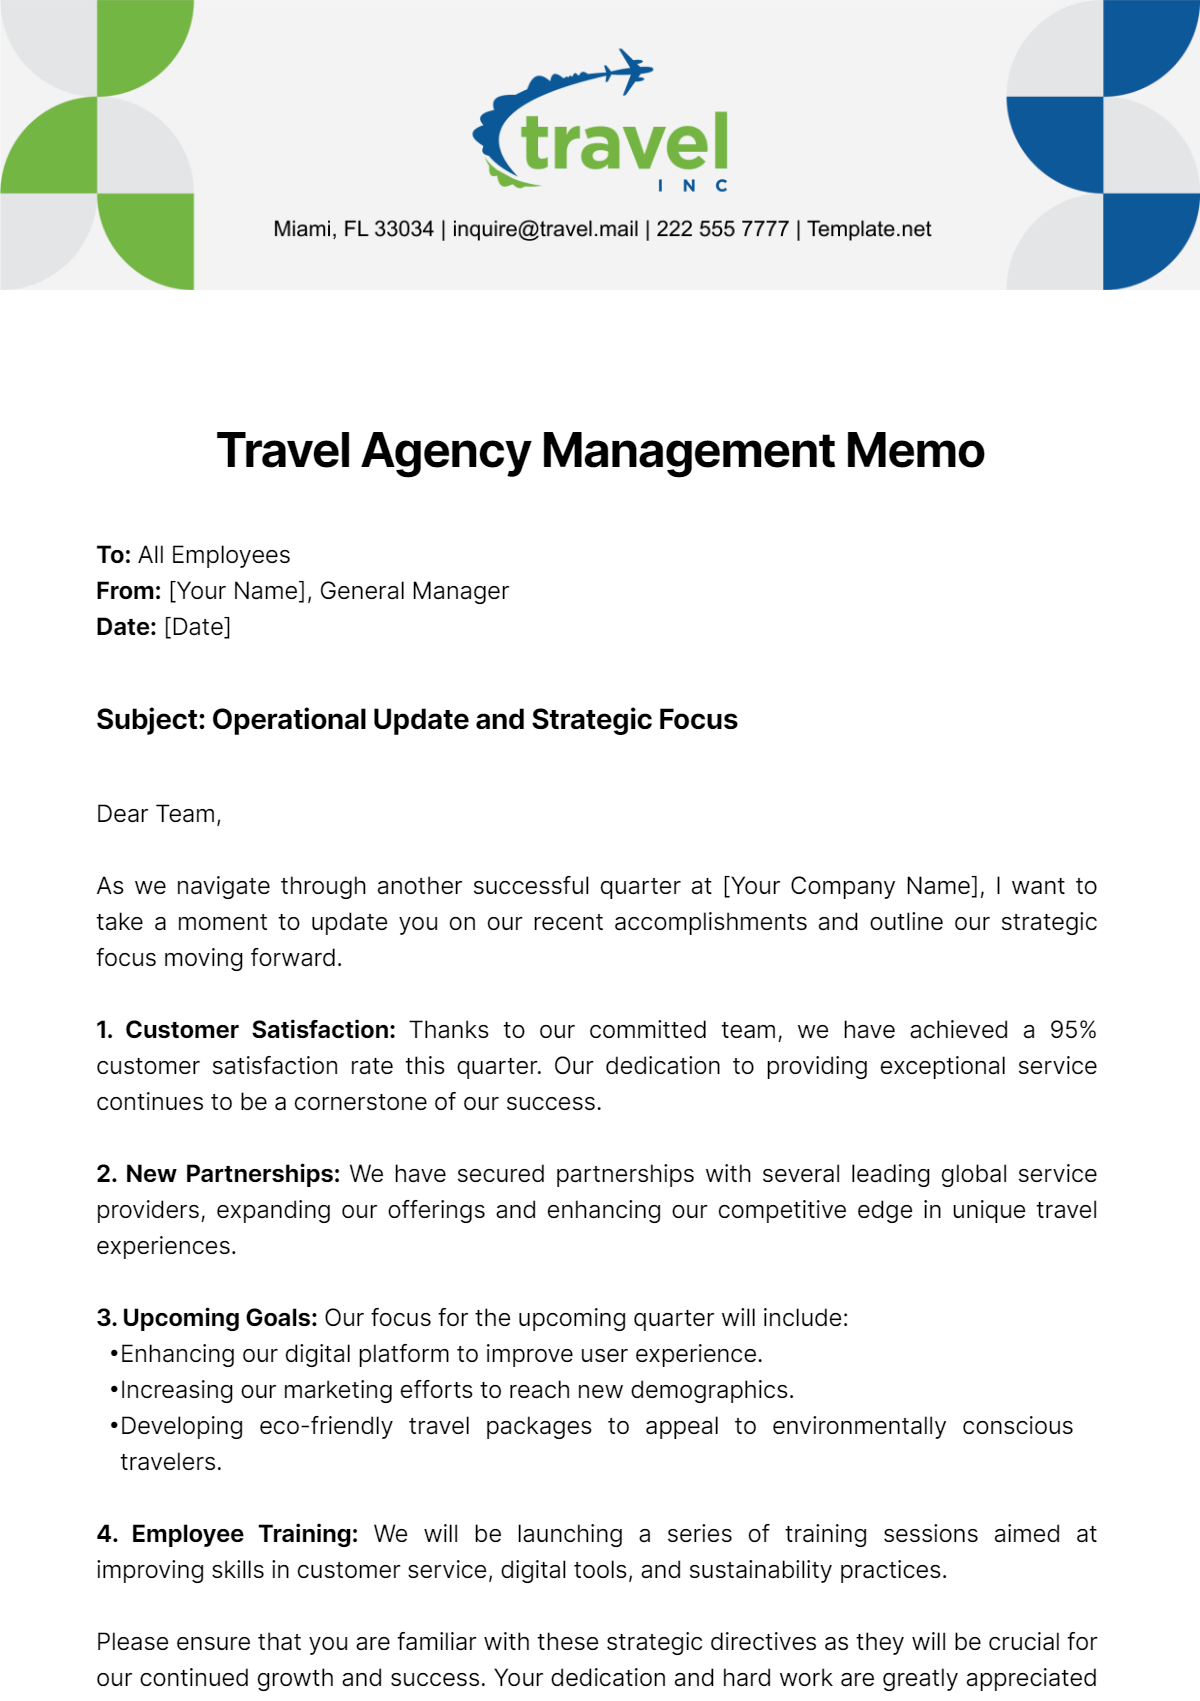 Free Travel Agency Management Memo Template